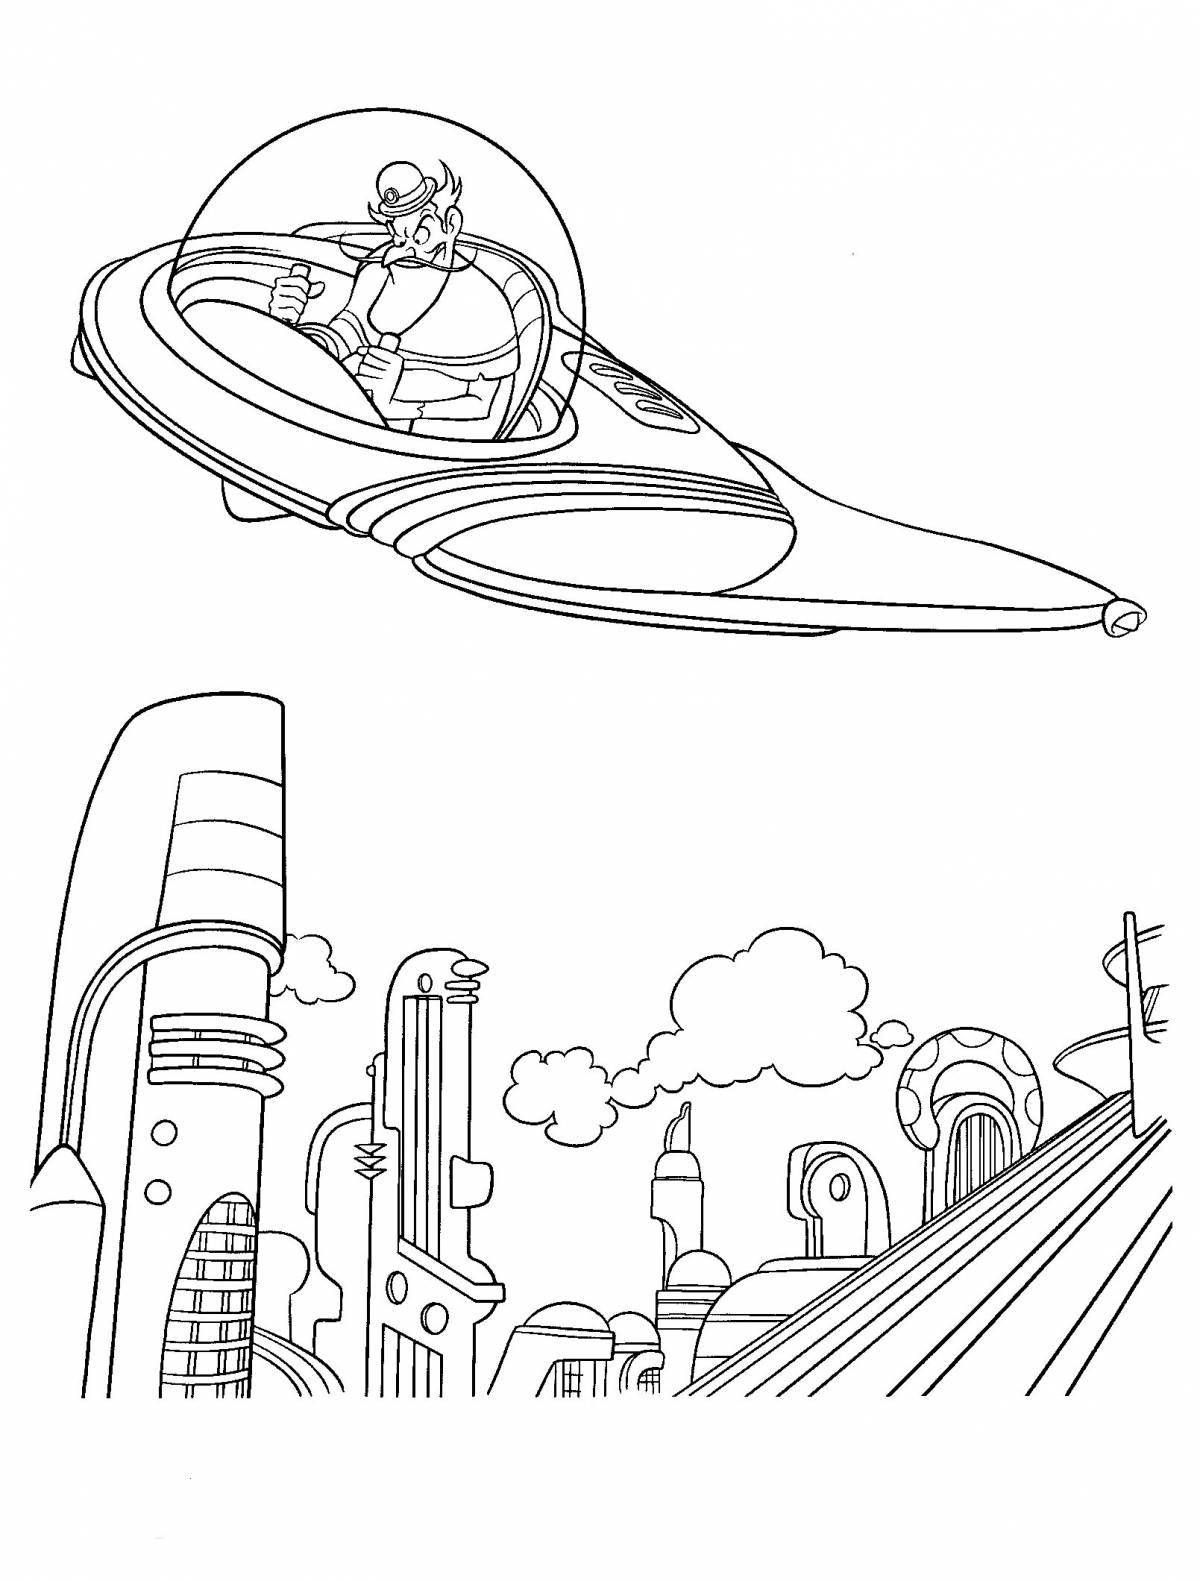 Charming space city coloring book